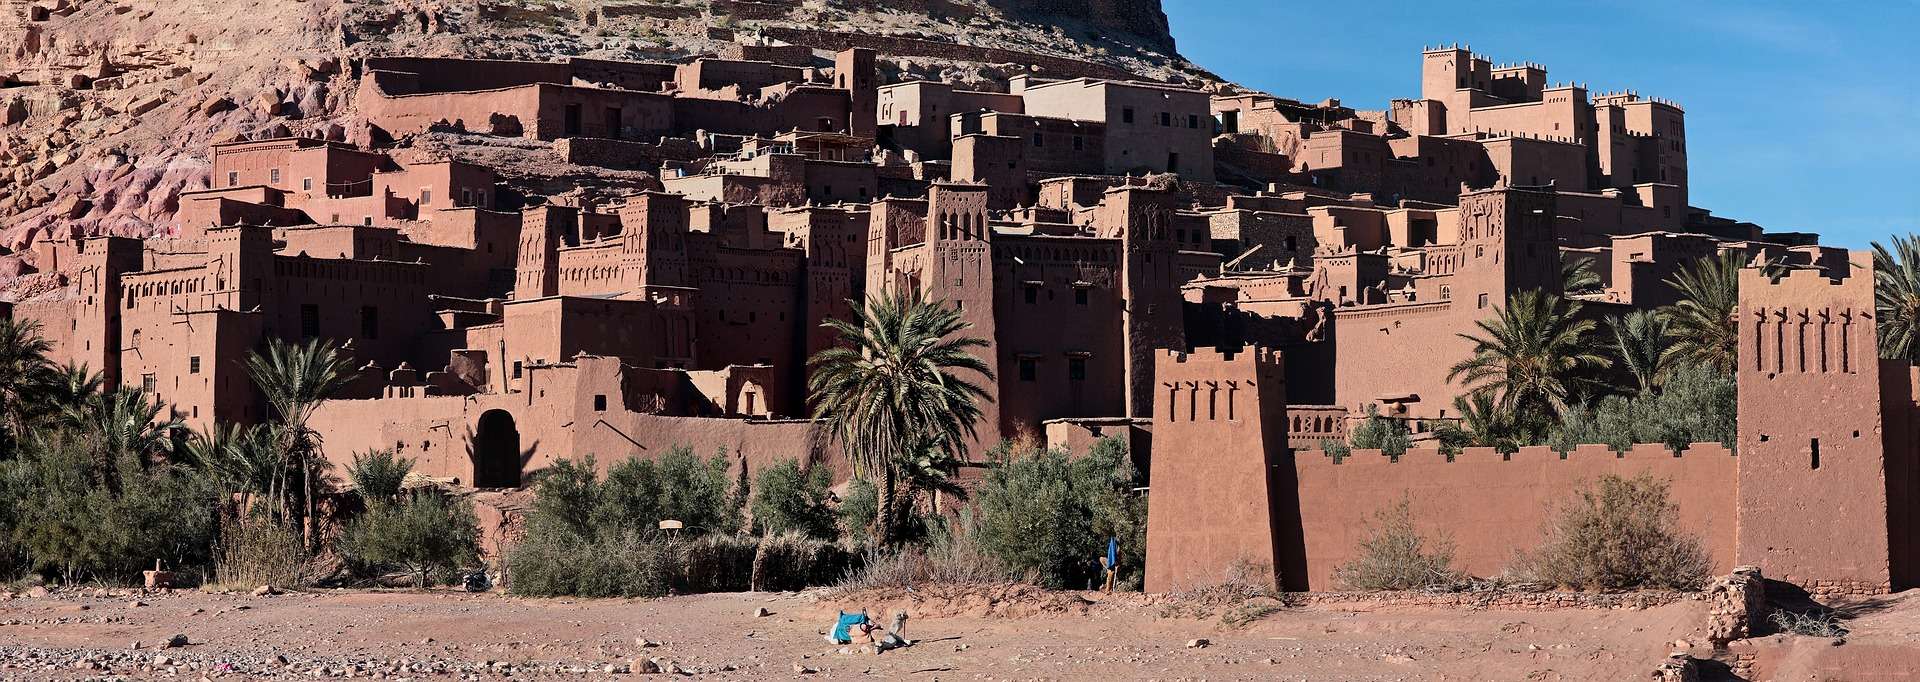 Ait Benhadou castle in Morocco representing the buildings of Moroccan Amazigh tribes